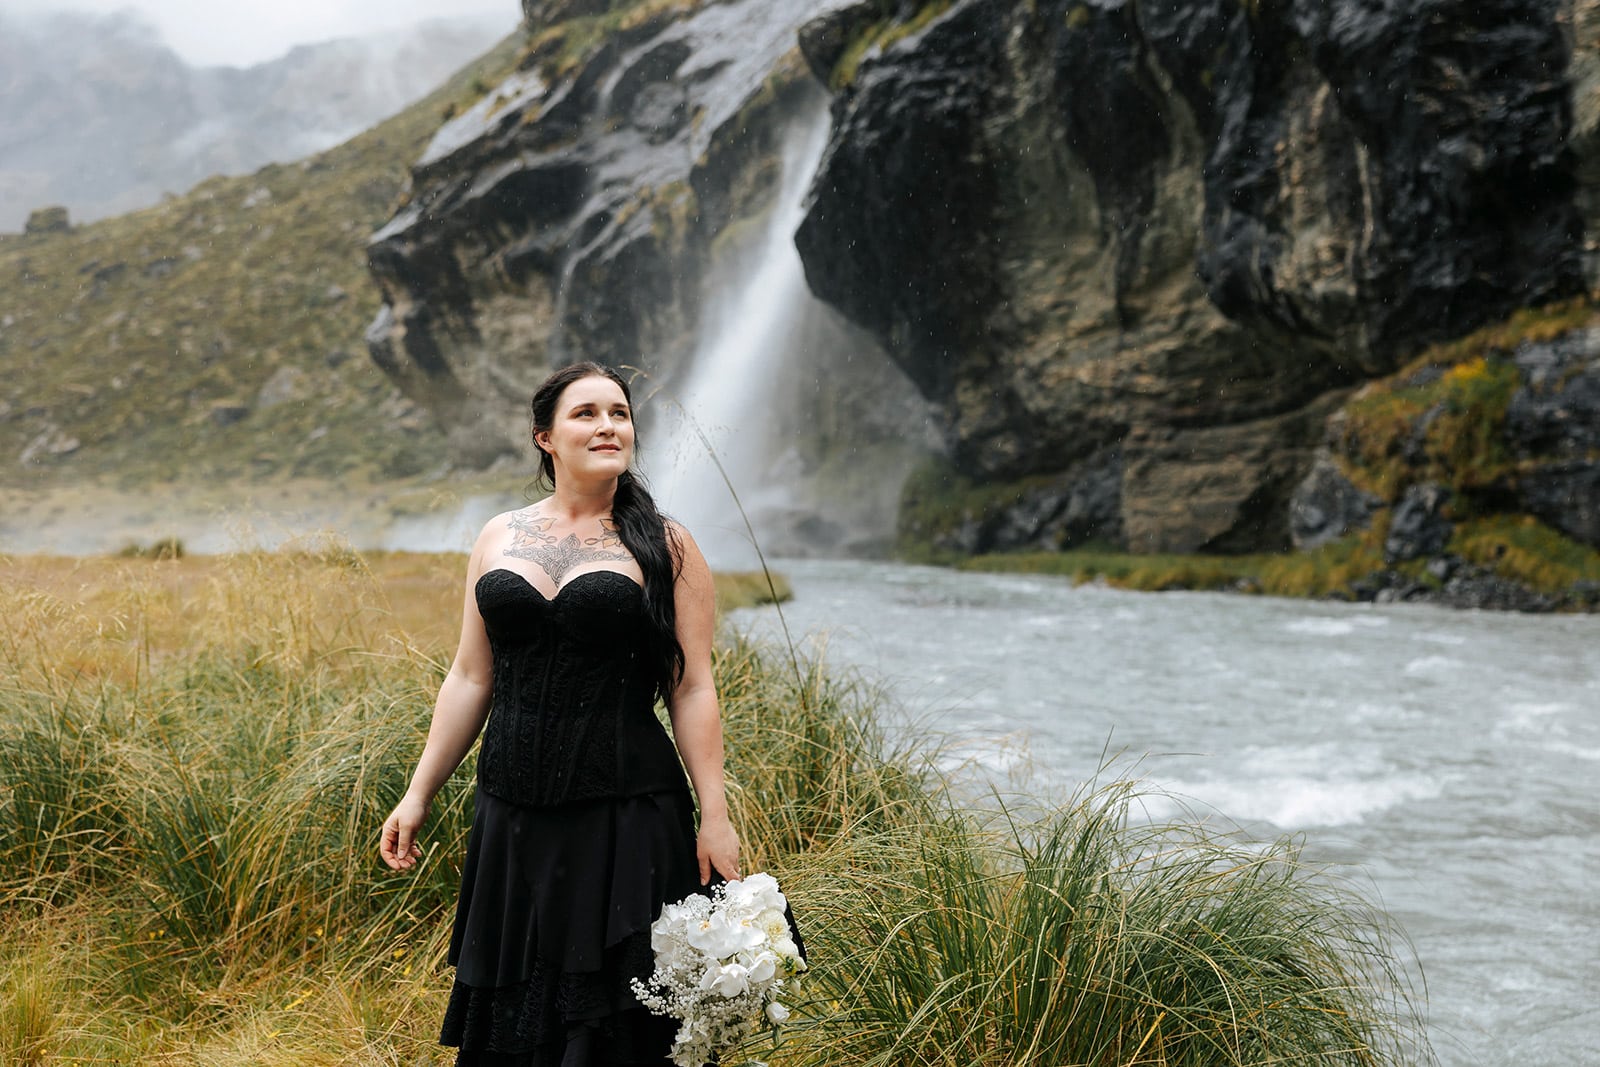 Alternative wedding with heavy metal theme and bride wearing black dress